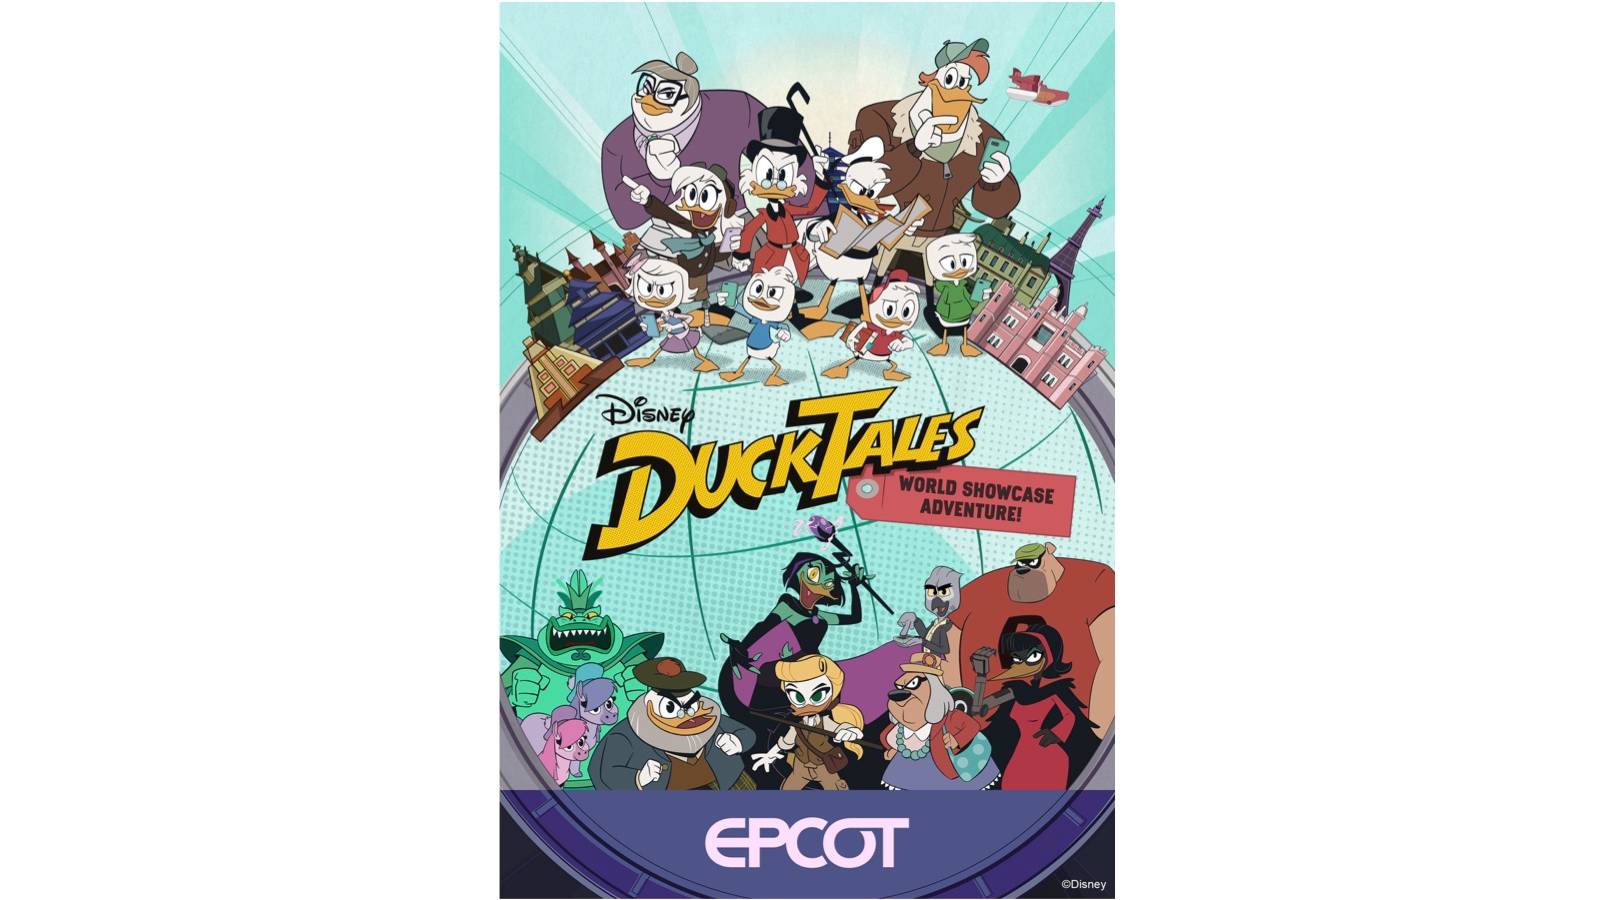 Disney's DuckTales World Showcase Adventure will open in 2022 at EPCOT